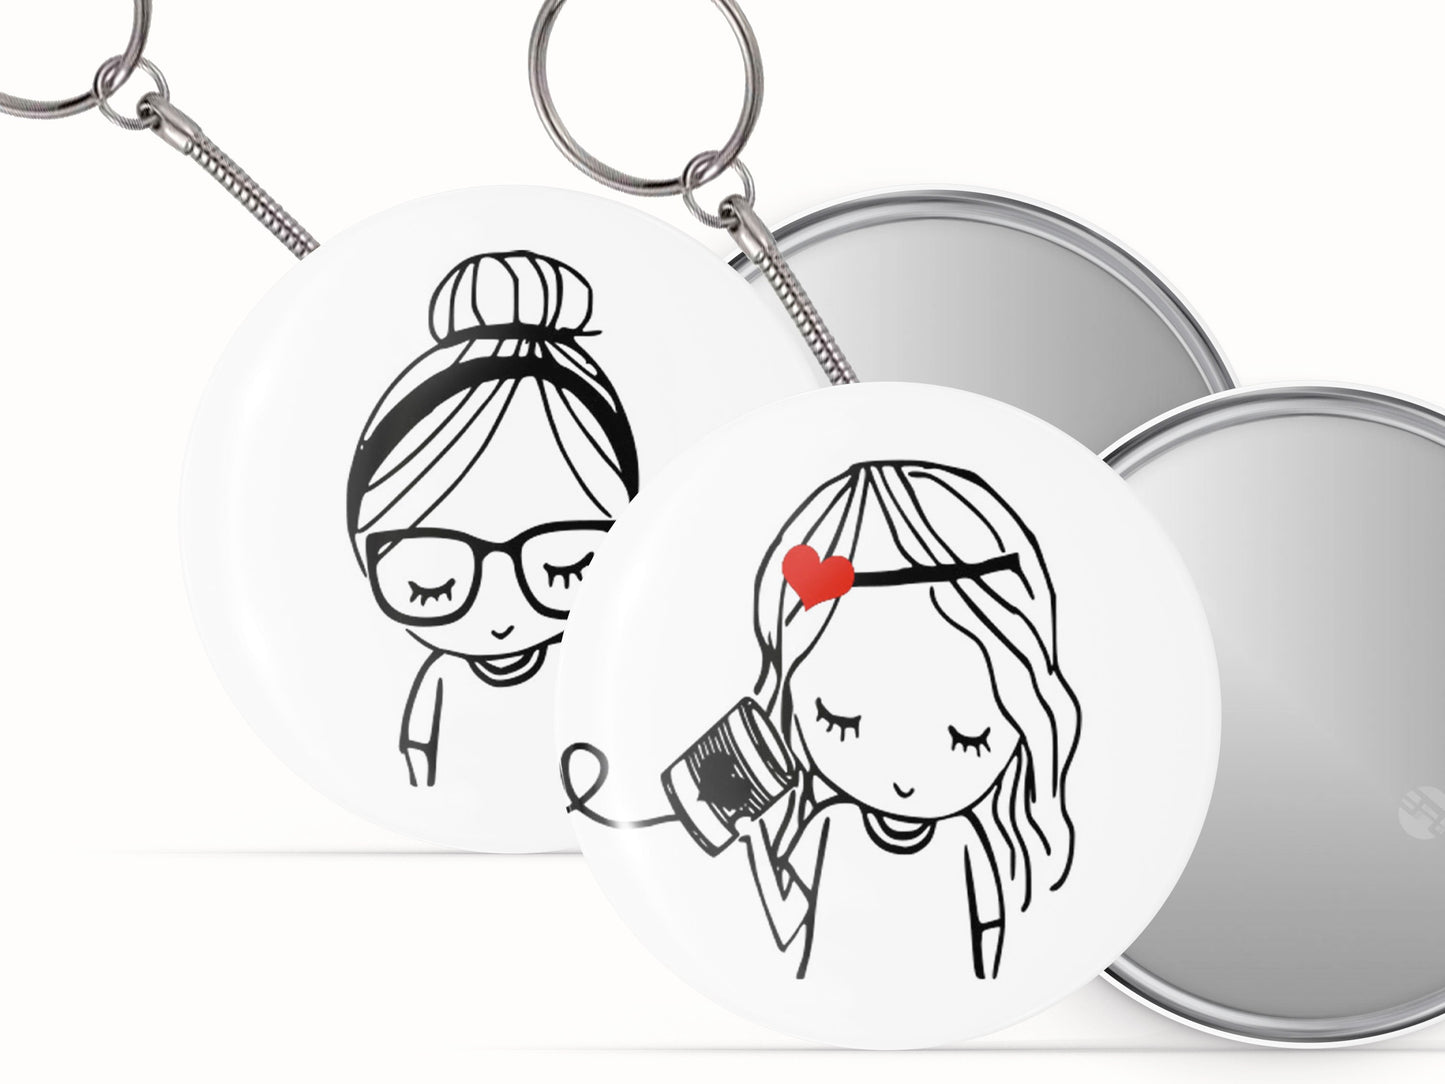 Personalized Bestfriends Keychain, Custom Button Pins for Galentines Day - 2 pieces